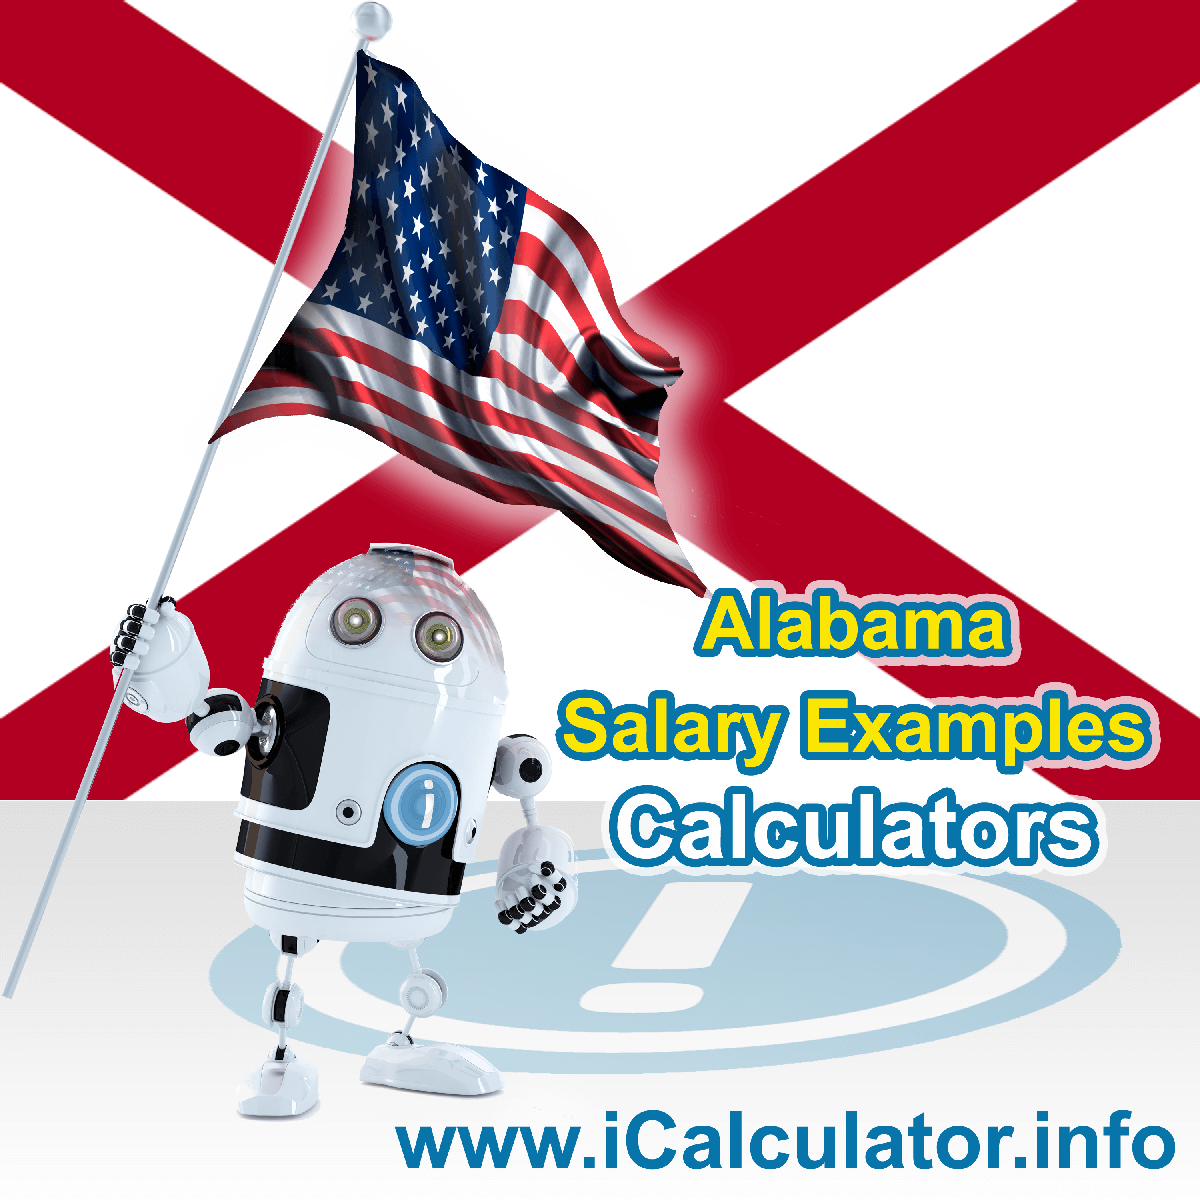 Alabama Salary Example for $ 30,000.00 in 2023 | iCalculator™ | $ 30,000.00 salary example for employee and employer paying Alabama State tincome taxes. Detailed salary after tax calculation including Alabama State Tax, Federal State Tax, Medicare Deductions, Social Security, Capital Gains and other income tax and salary deductions complete with supporting Alabama state tax tables 